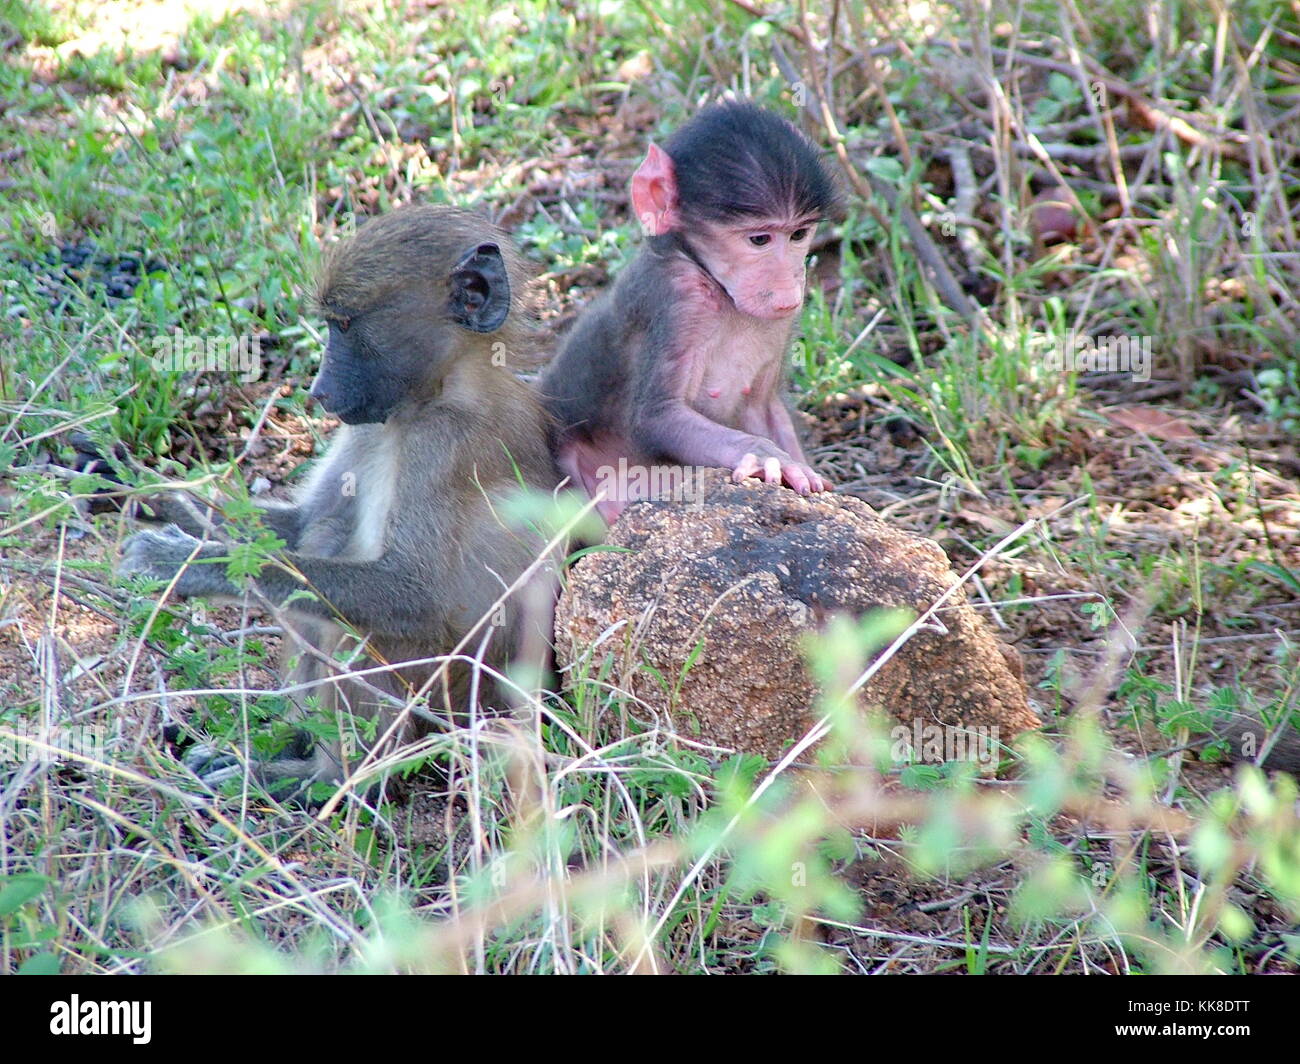 South Africa - November 4, 2011: Baby Baboons sighted in Kruger National Park Stock Photo